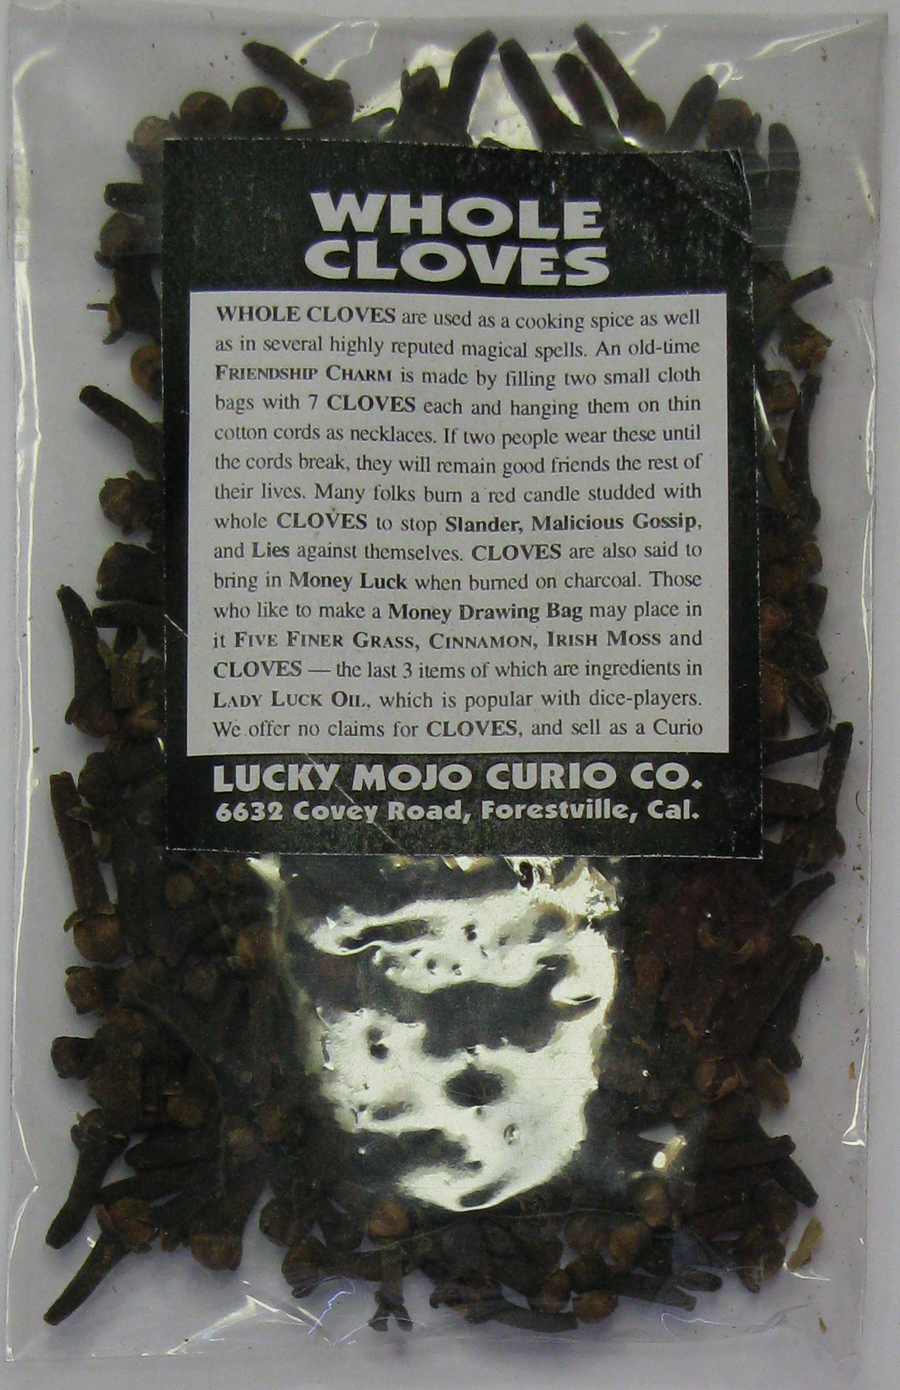 http://www.herb-magic.com/whole-cloves-pack-large.JPG